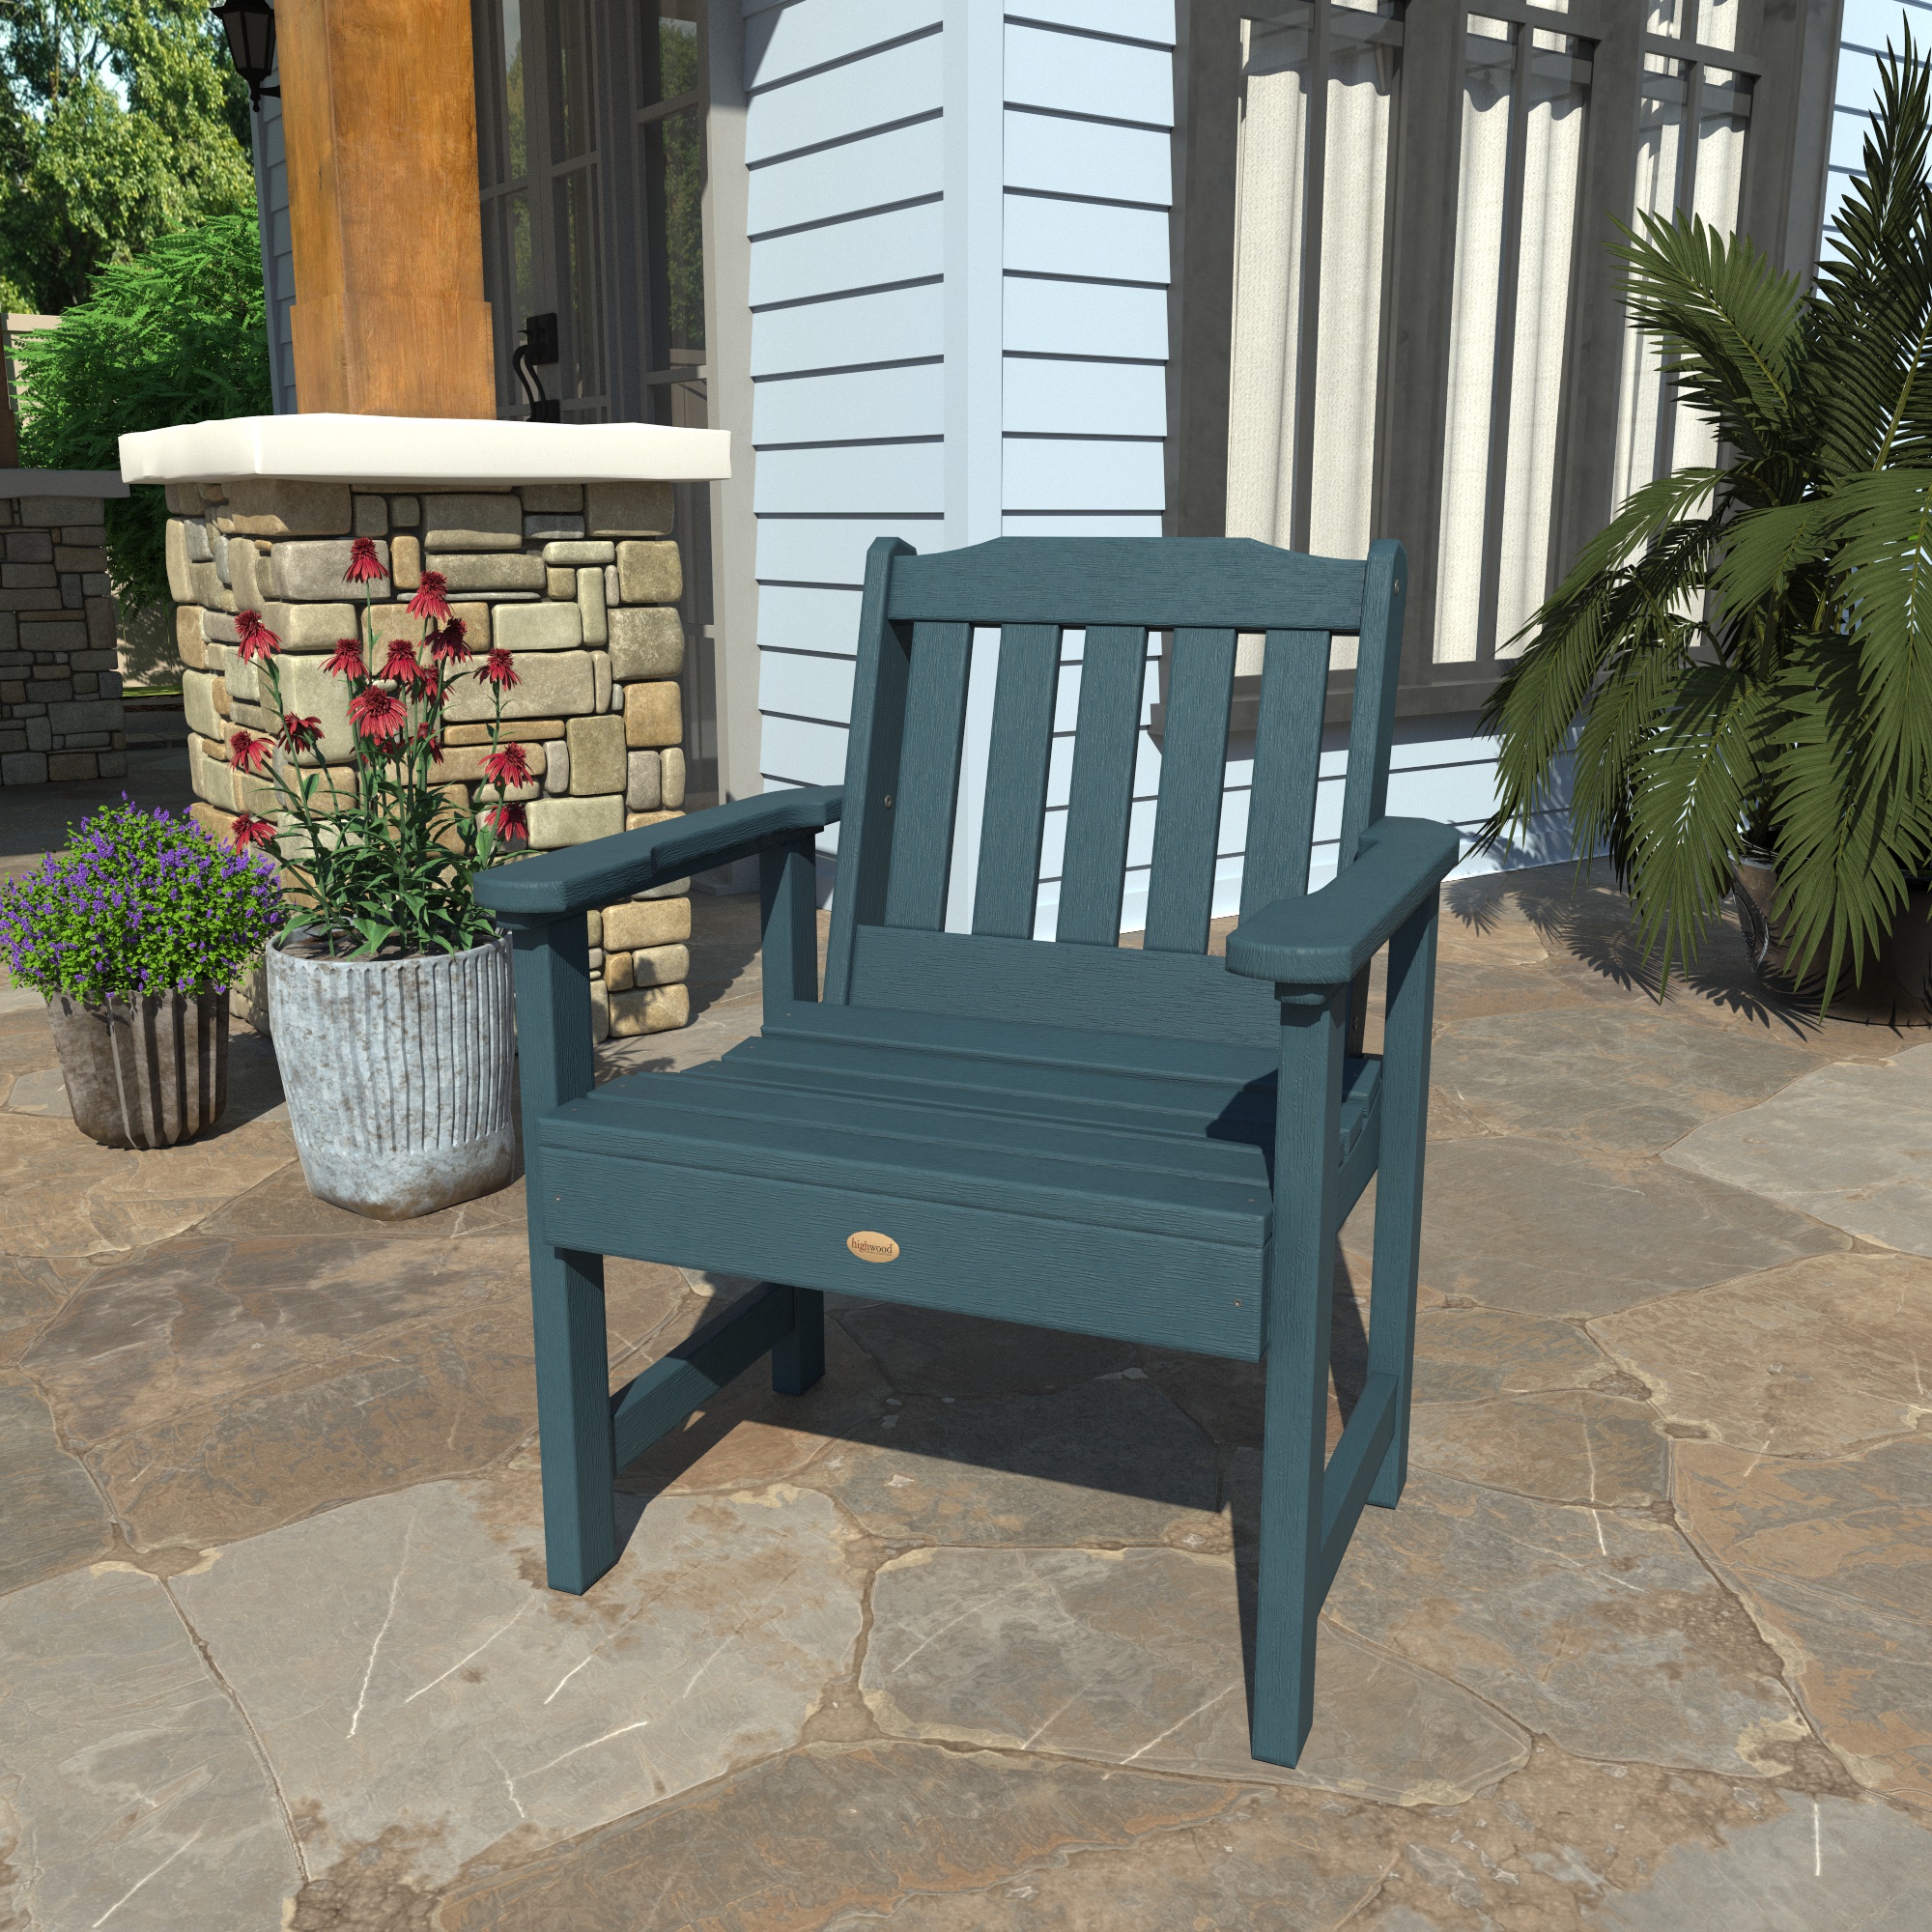 Highwood 3pc Lehigh Garden Chair Set with 1 Folding Adirondack Side Table - image 4 of 6